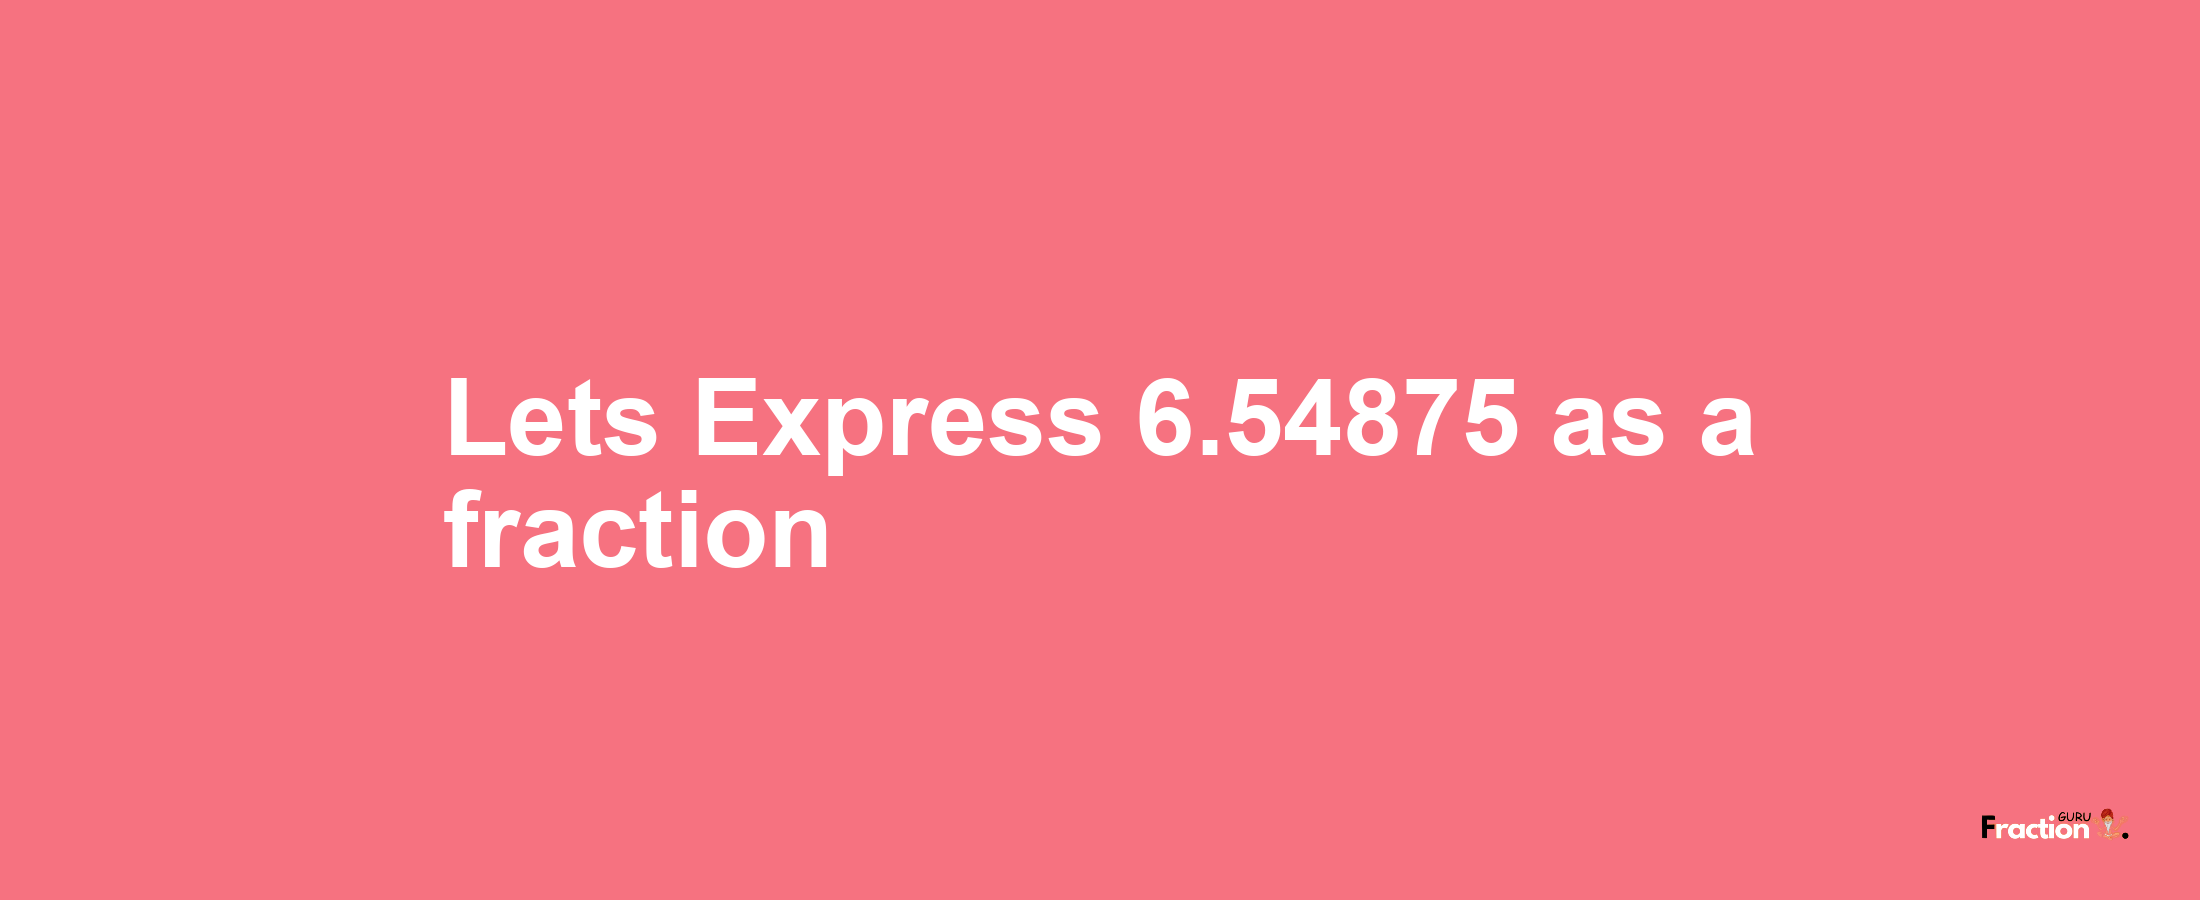 Lets Express 6.54875 as afraction